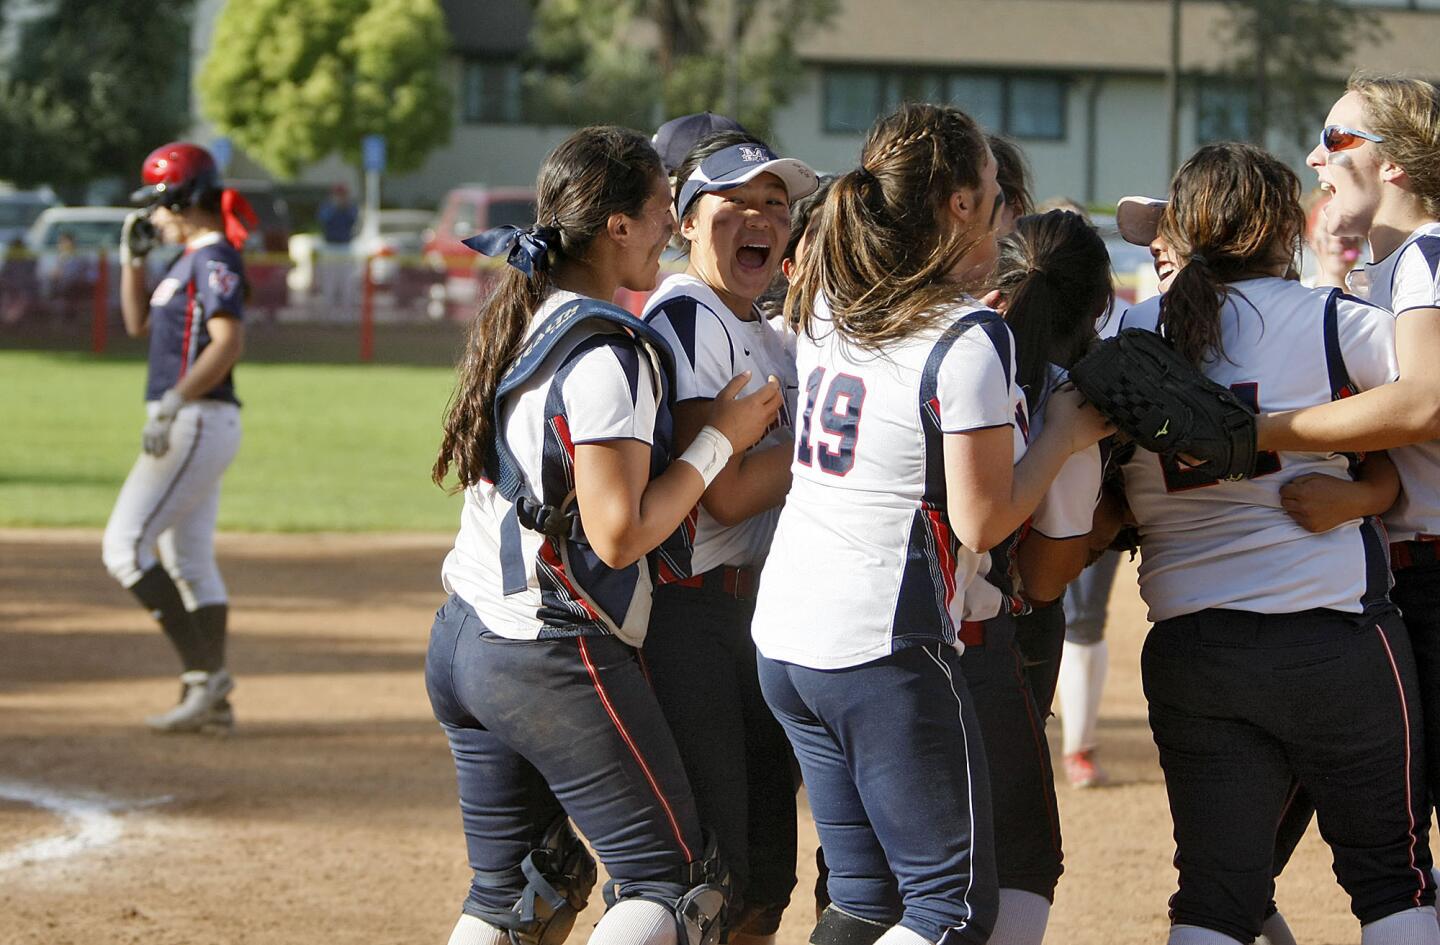 As a dejected La Salle softball player walks off the field in the background, Maranatha softball players celebrate their away win vs. La Salle at Latter Day Saints softball field in Pasadena on Thursday, April 11, 2013.